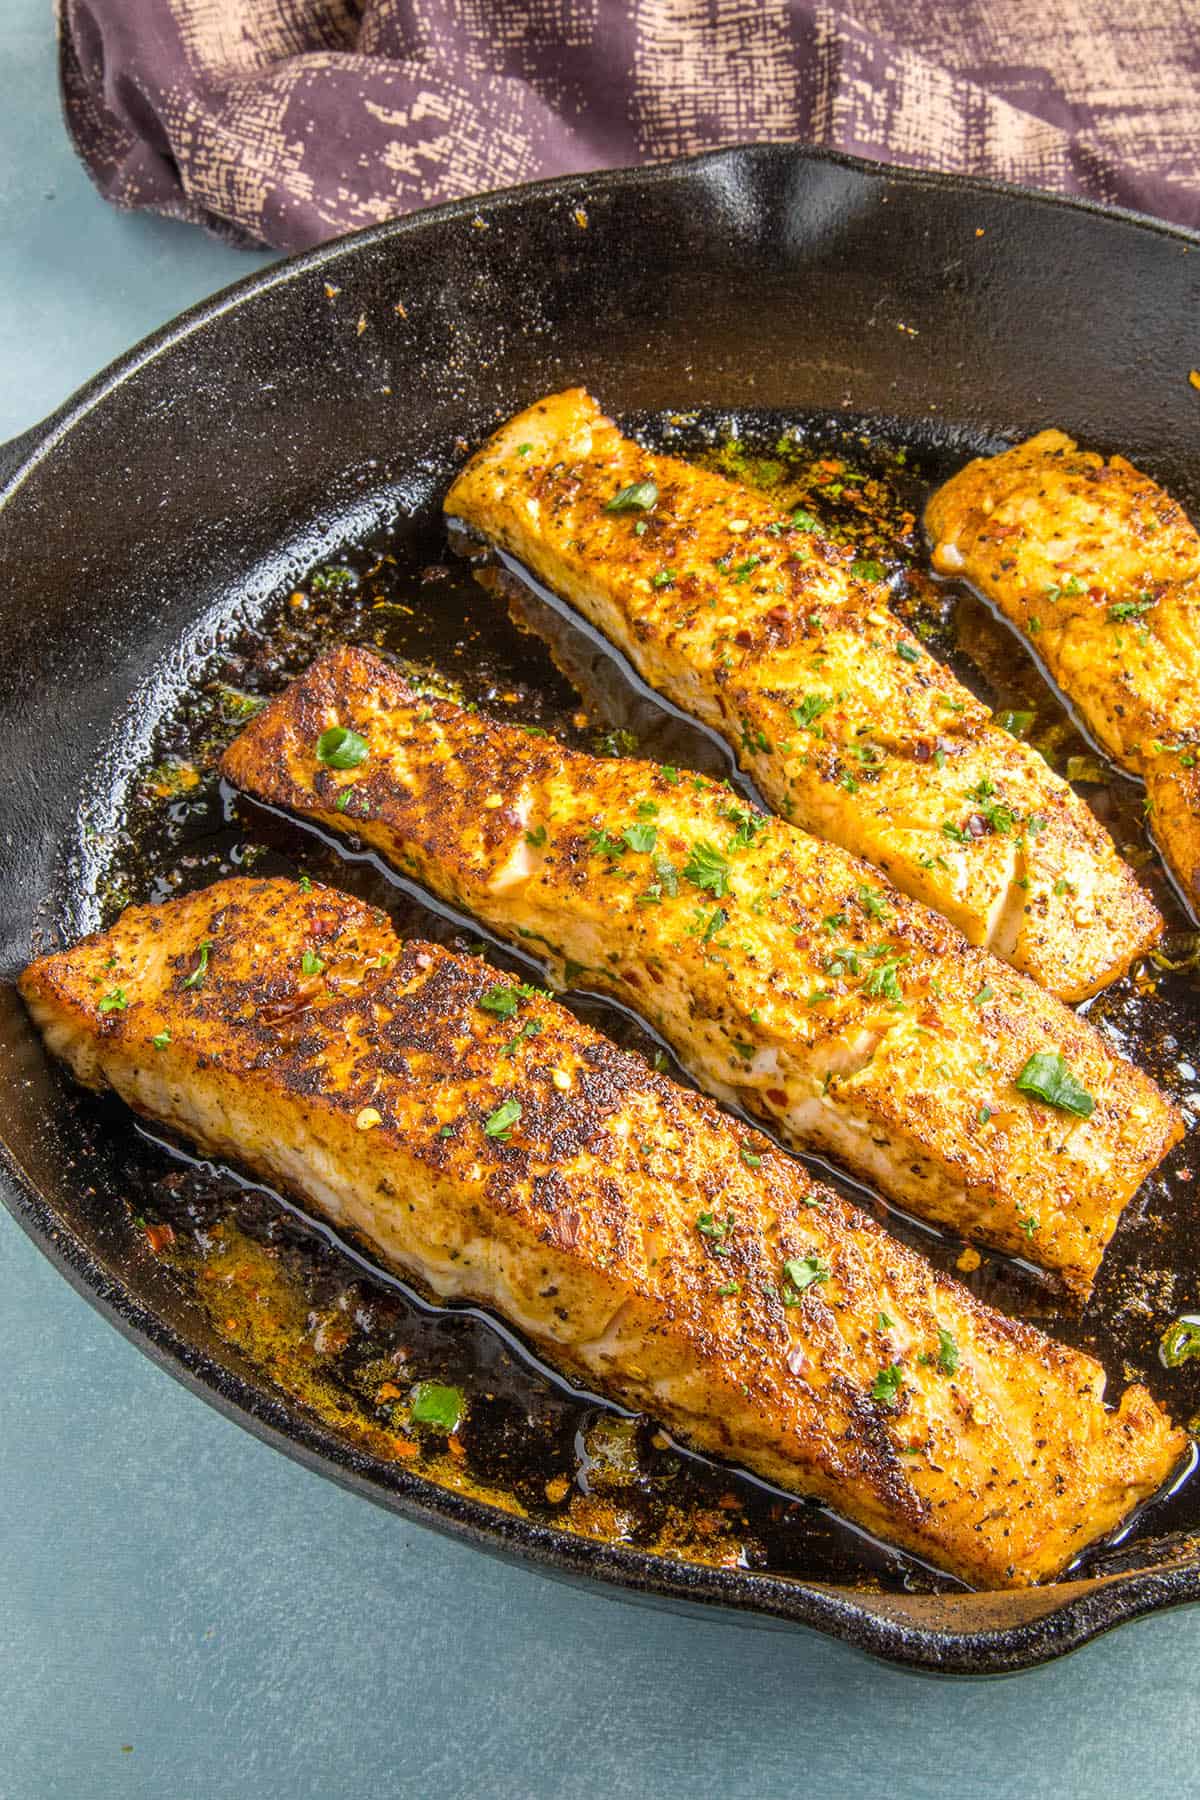 Blackened Salmon in a skillet